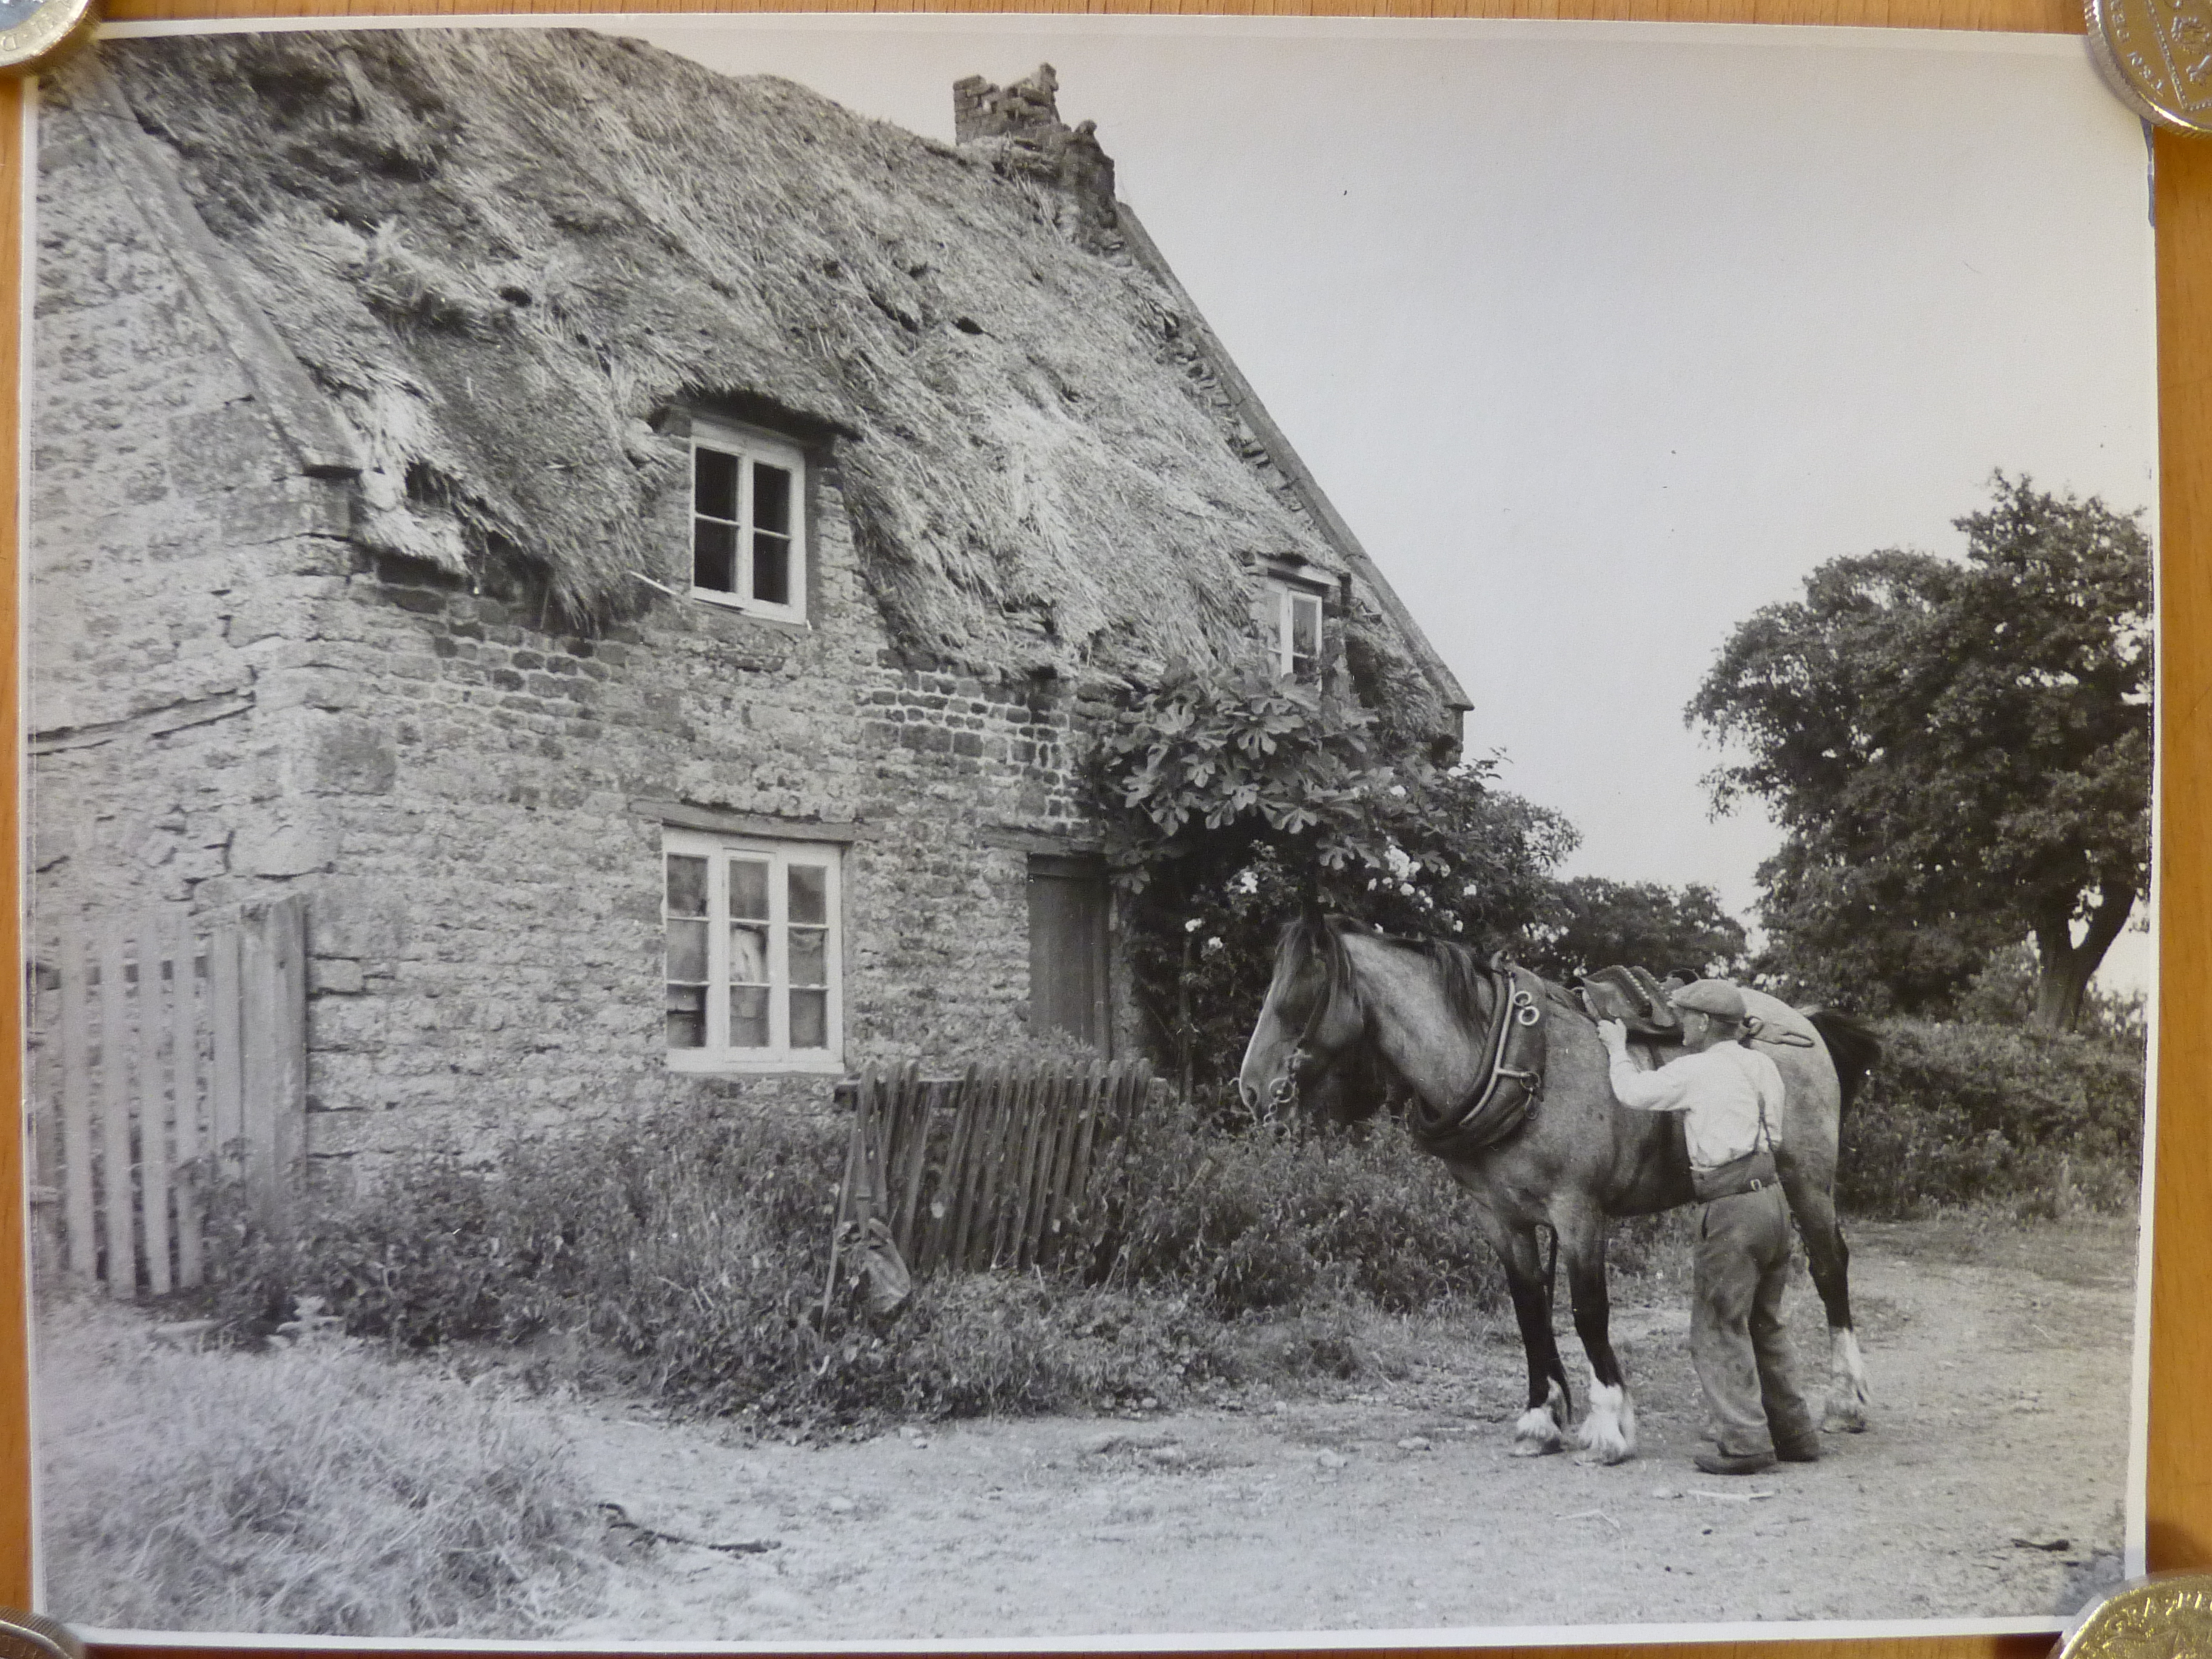 House with horse and man in front